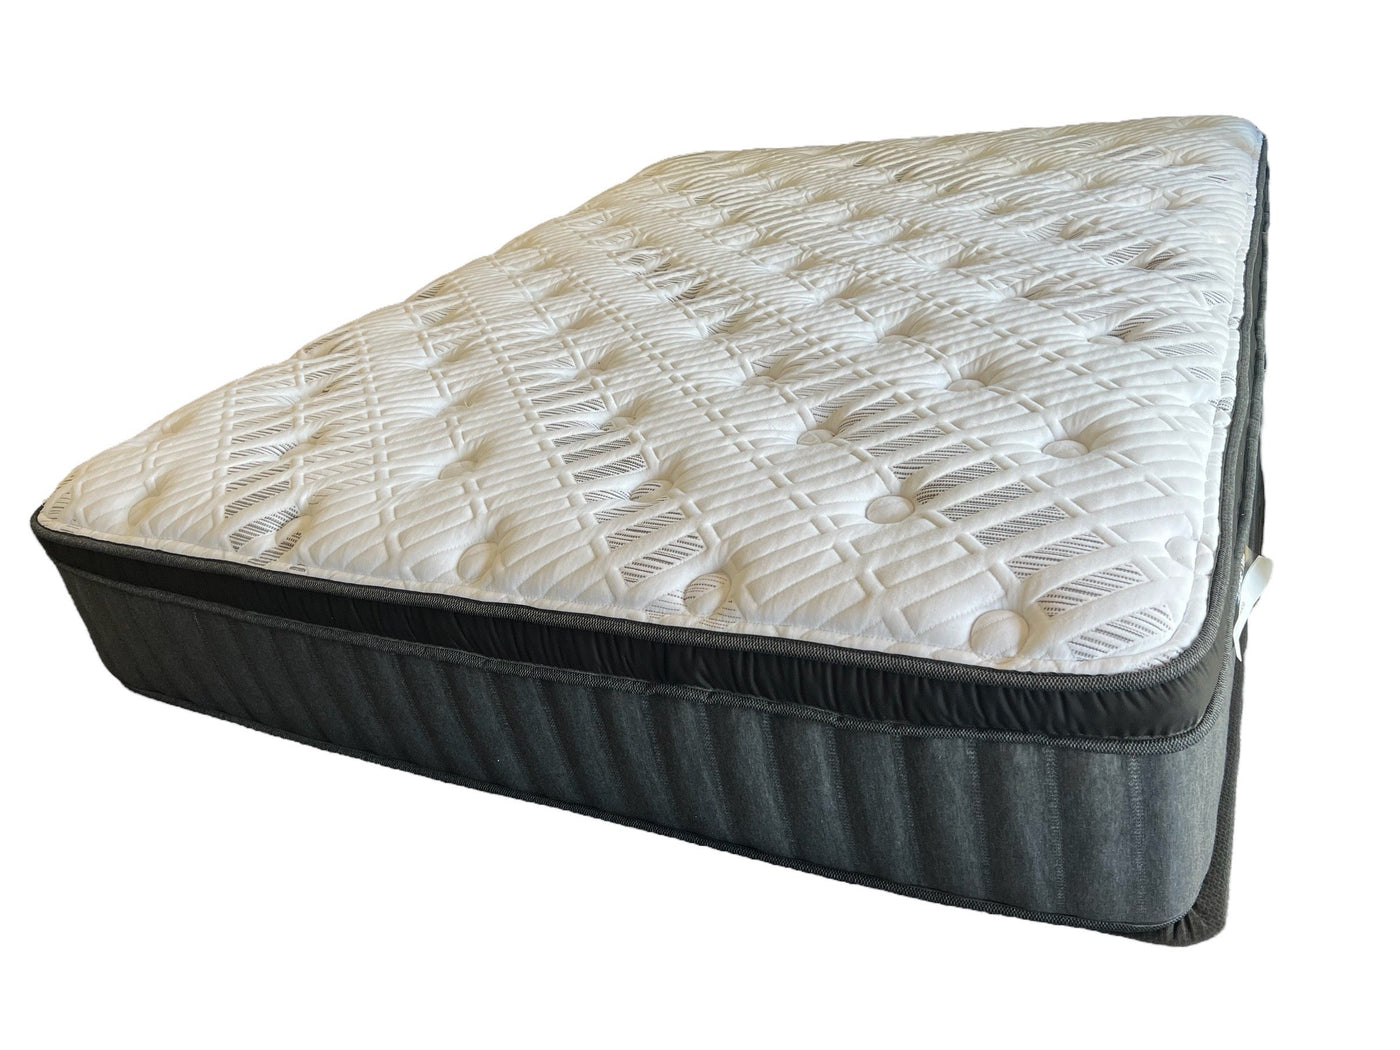 CLEARANCE Alicia Queen Plush Mattress Only WHOLESALE PRICE ON FLOOR MODEL